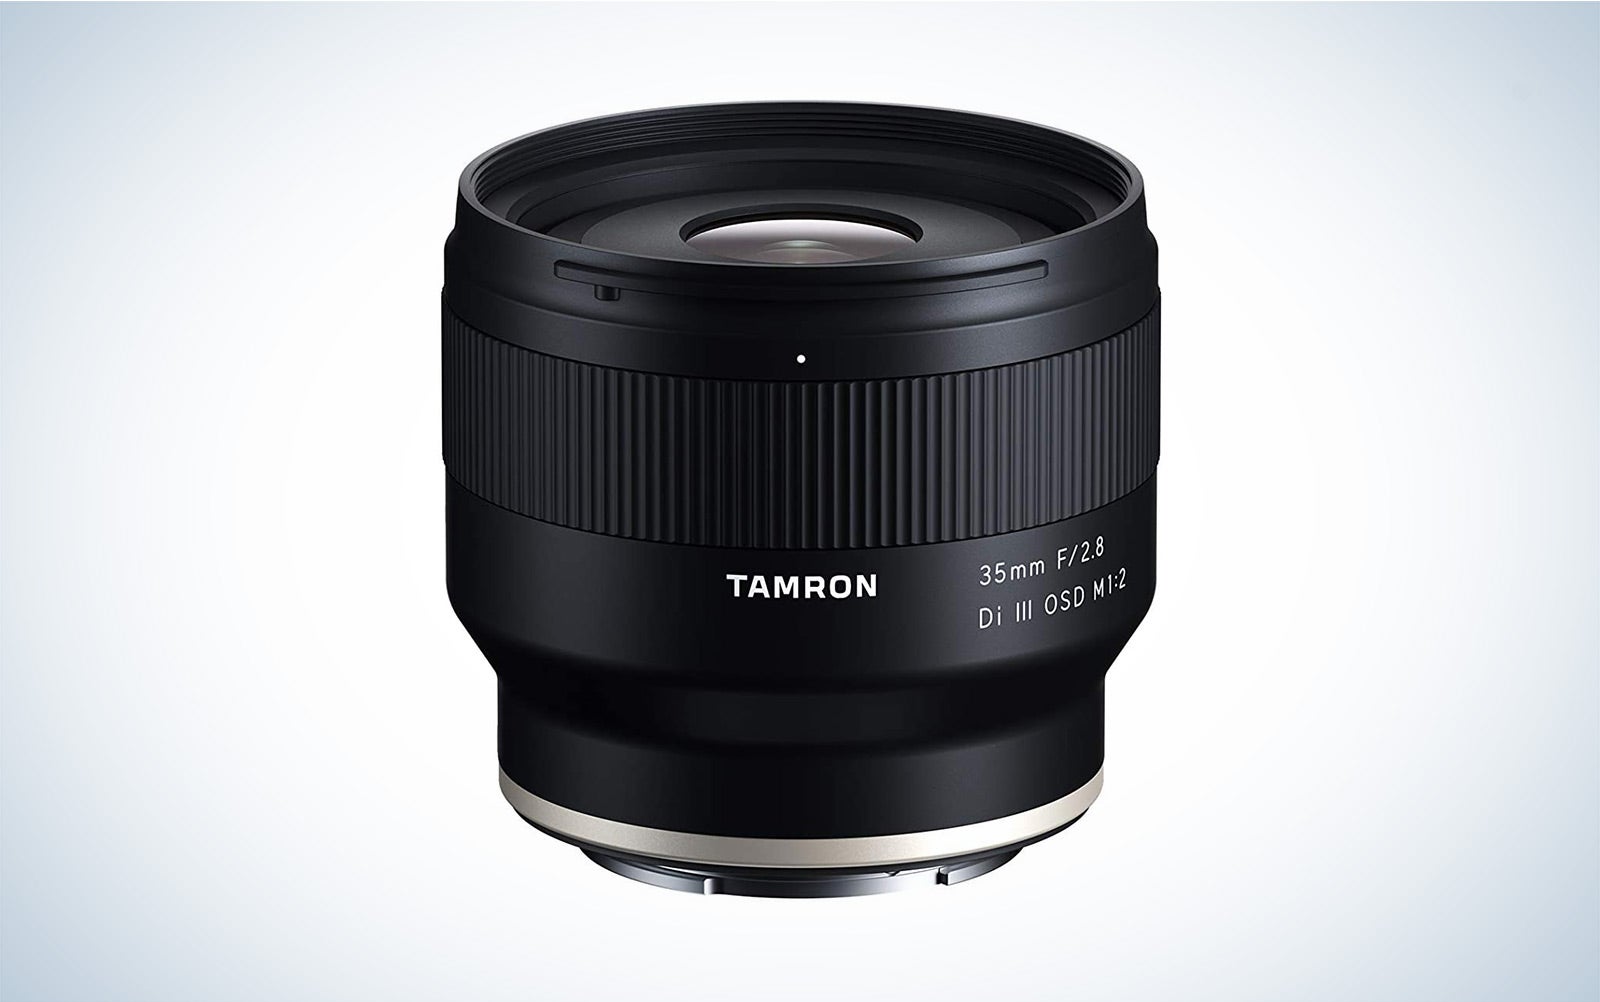 The Tamron 35mm f/2.8 Di III is the best budget prime lens for Sony.